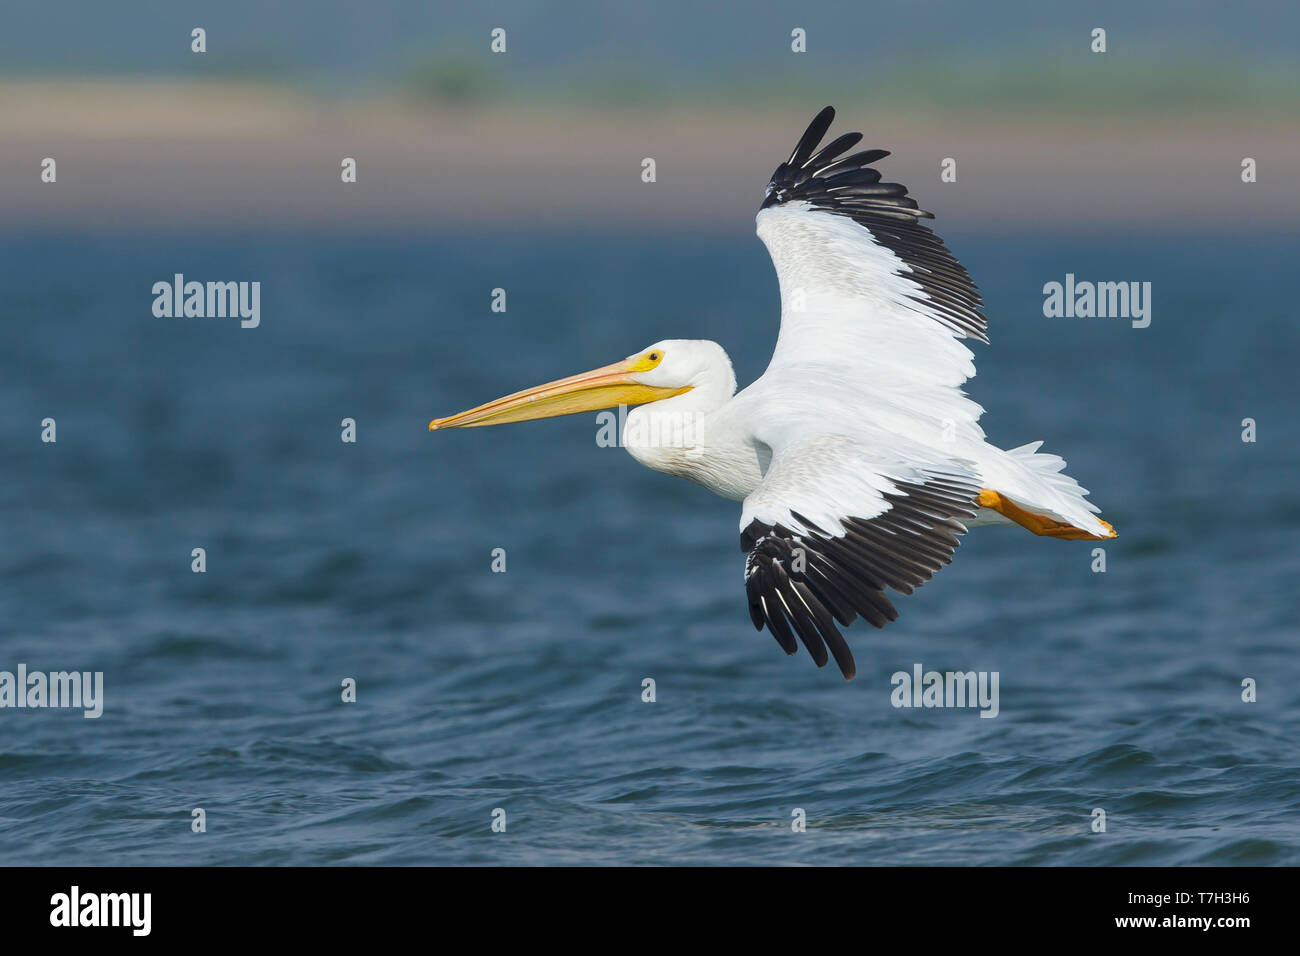 Adult American White Pelican (Pelecanus erythrorhynchos) in flight over lake in Deschutes County Oregon during late summer. Stock Photo